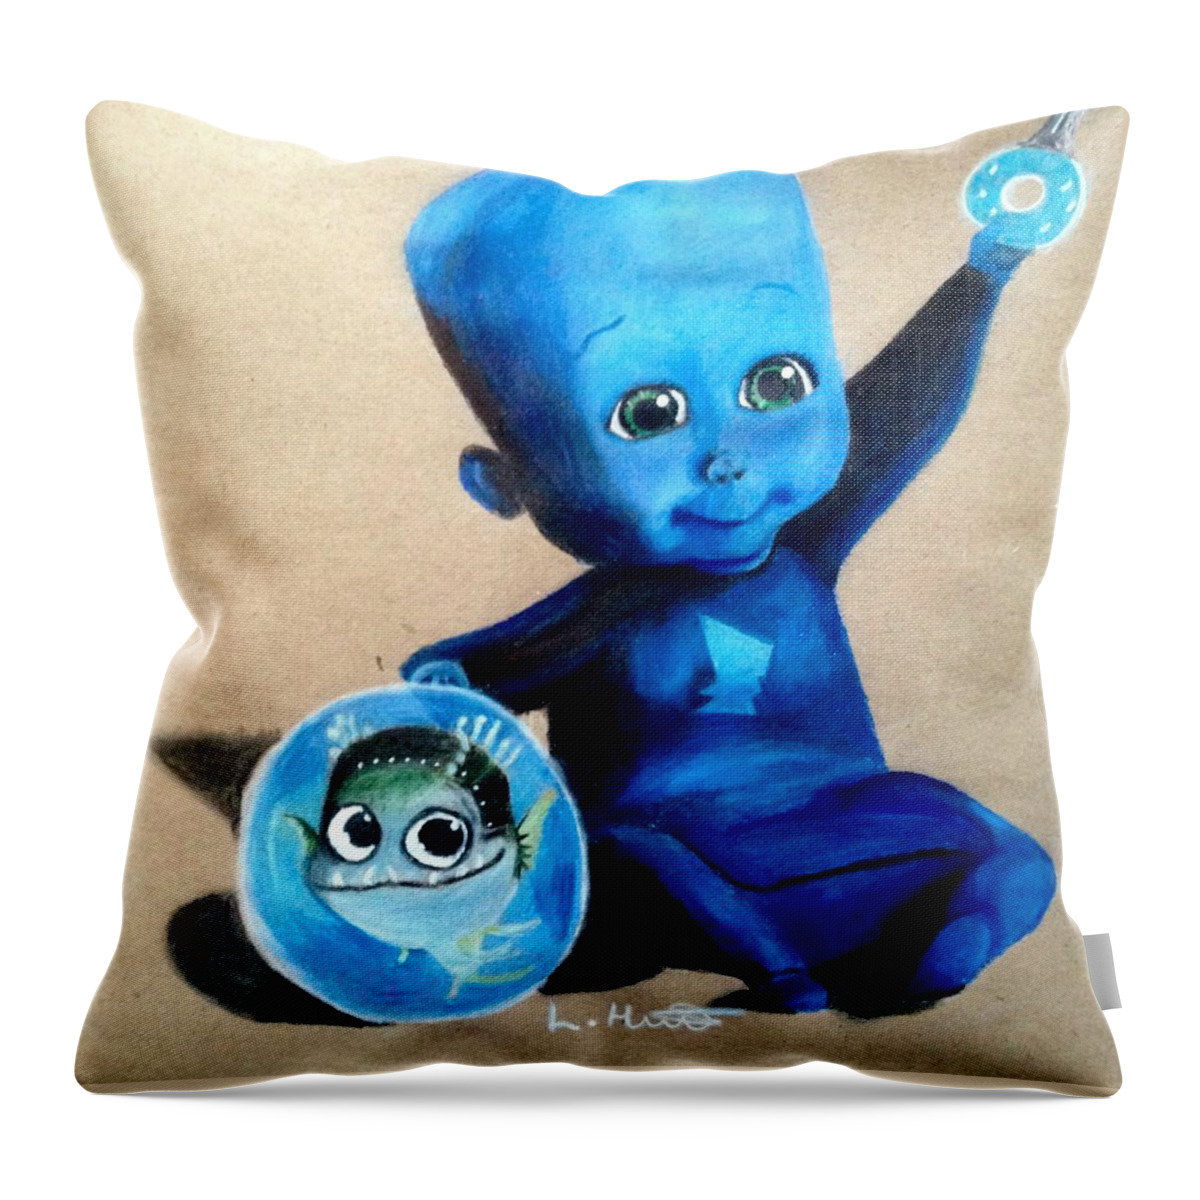 child labor simulator Throw Pillow for Sale by Nevermind-artss